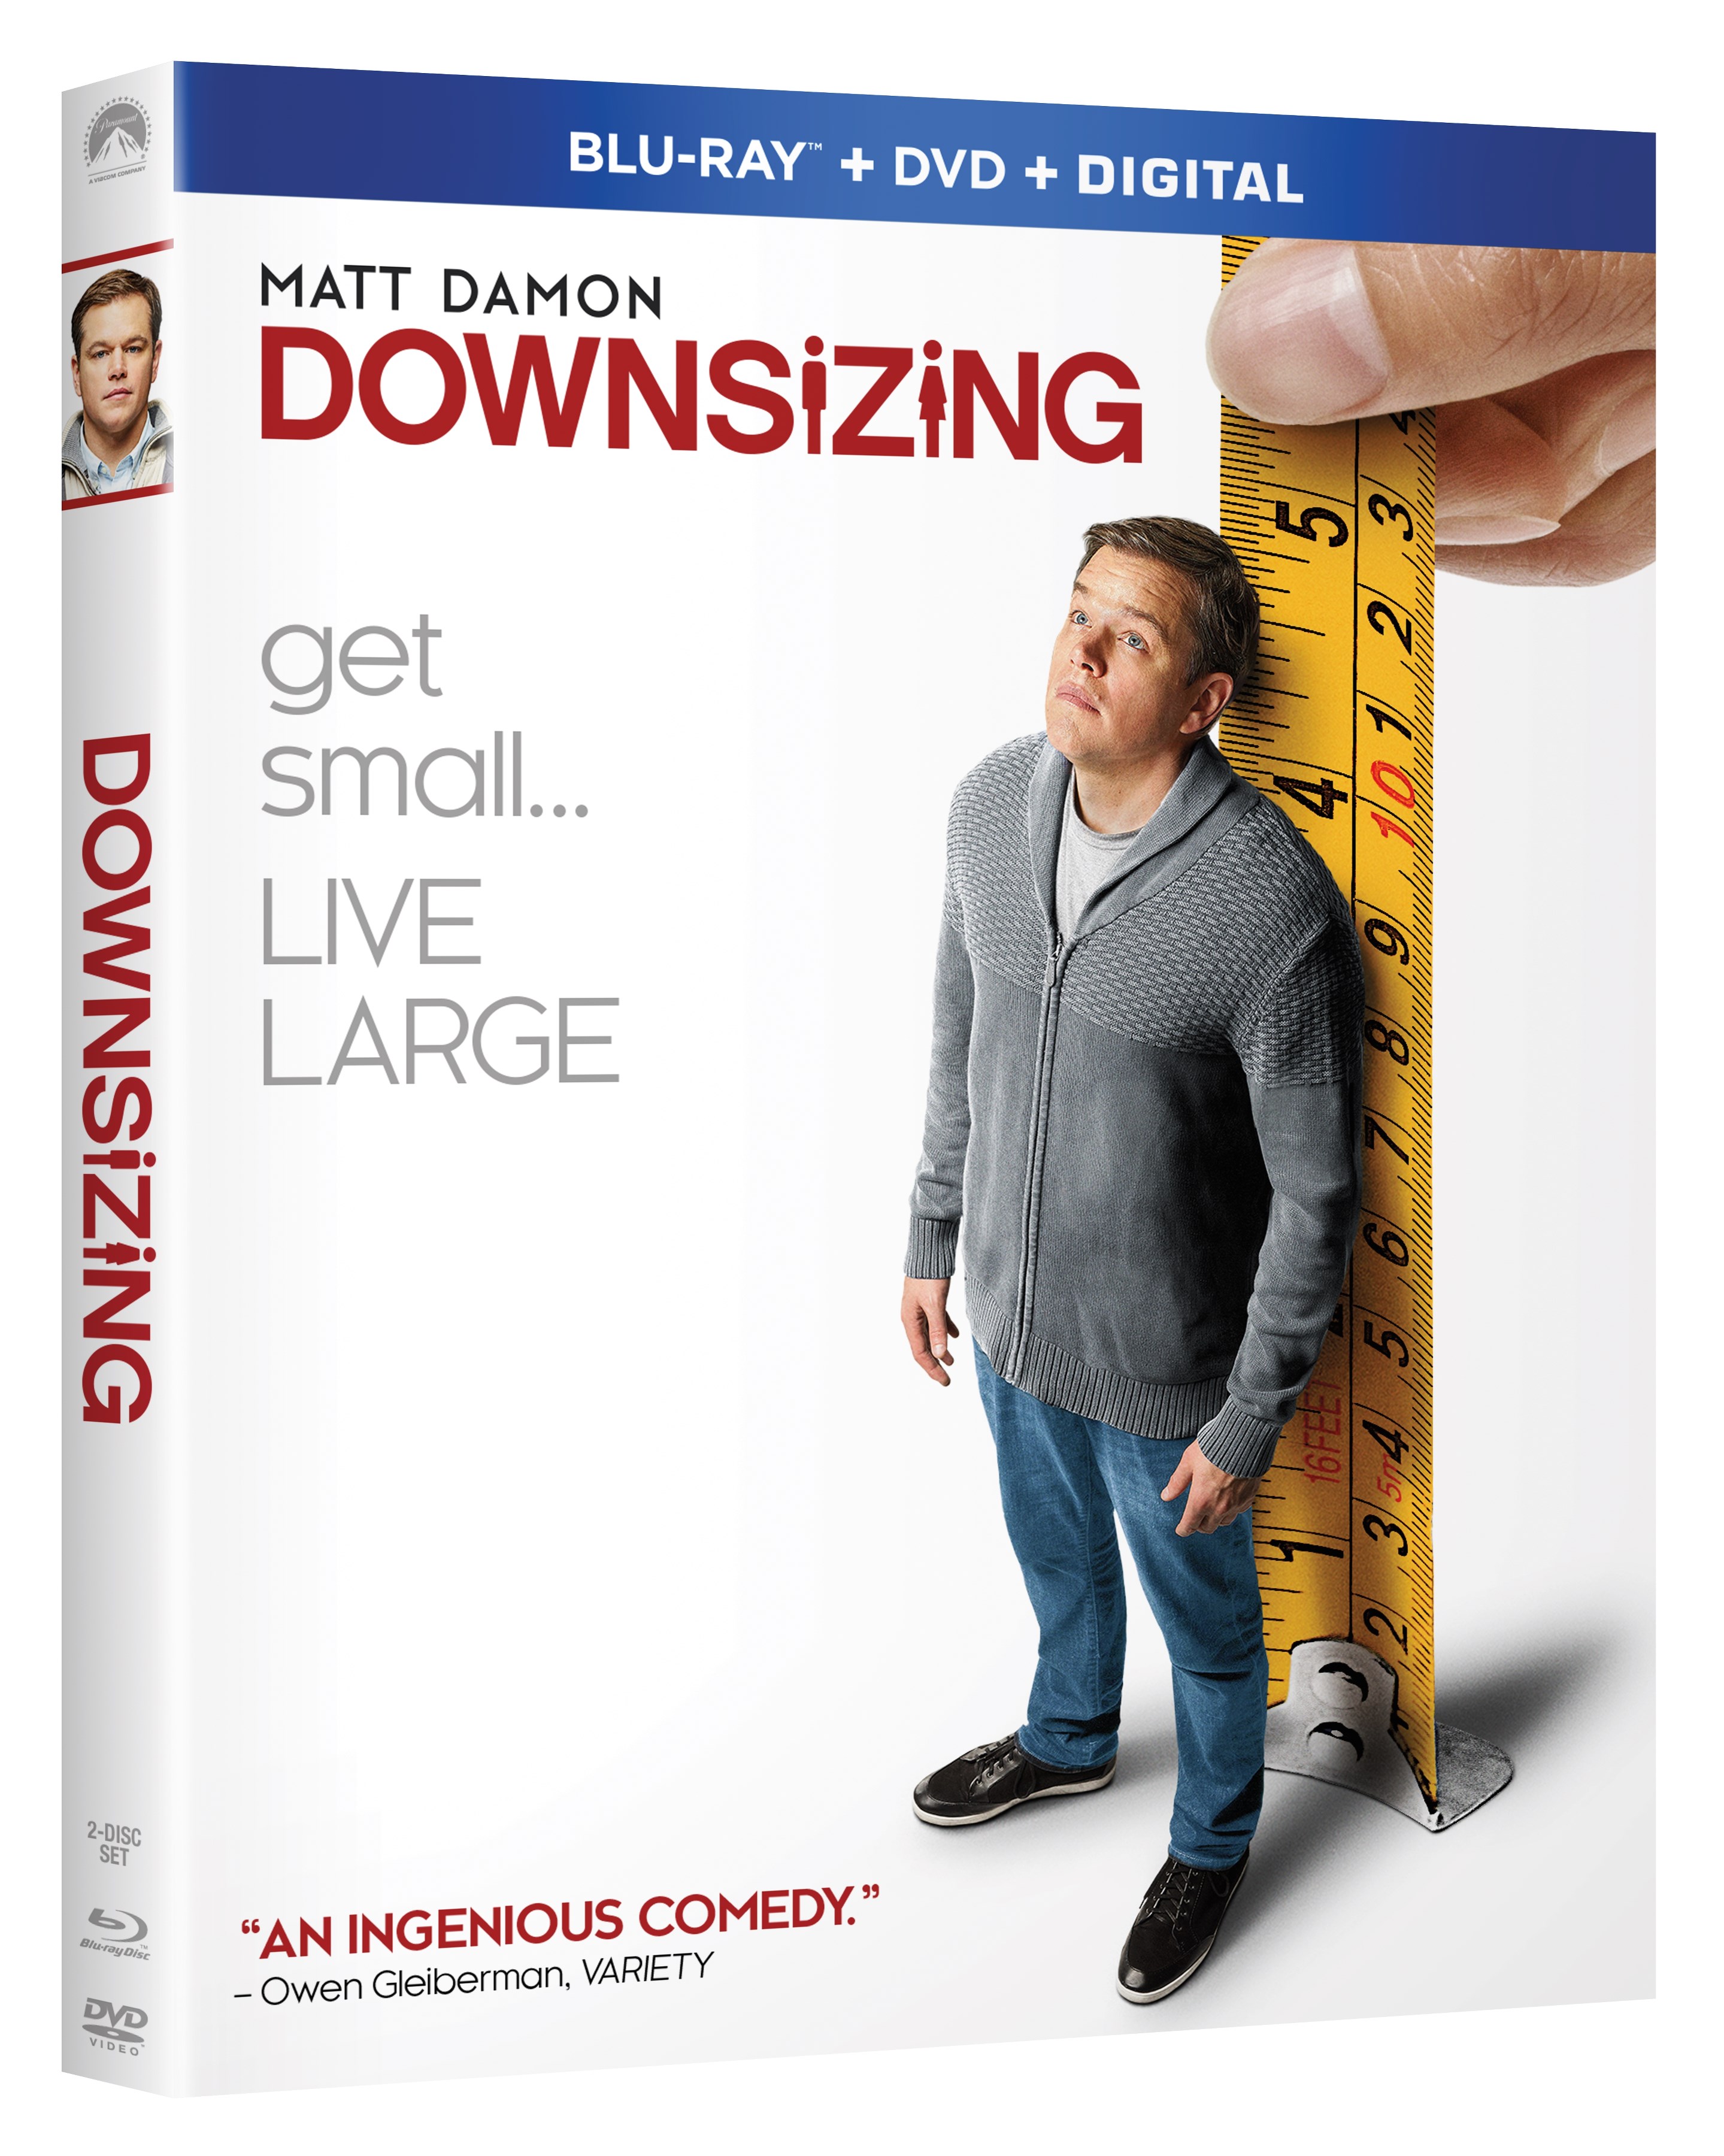 Downsizing Blu-Ray Combo Pack cover (Paramount Home Entertainment)